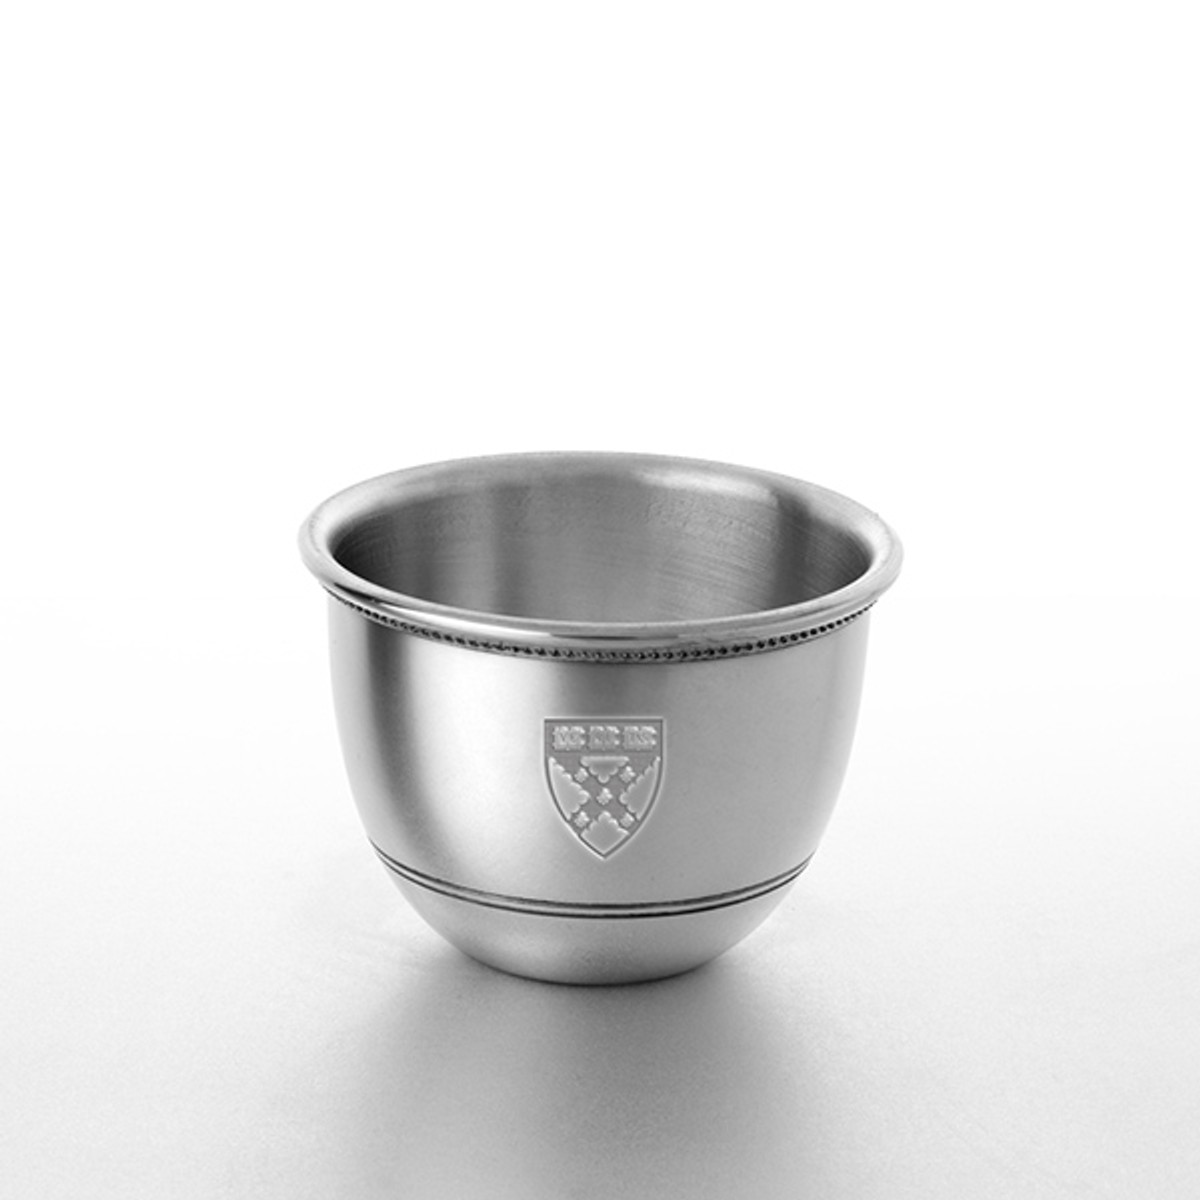 Harvard Business School Pewter Jefferson Cup at M.LaHart & Co.